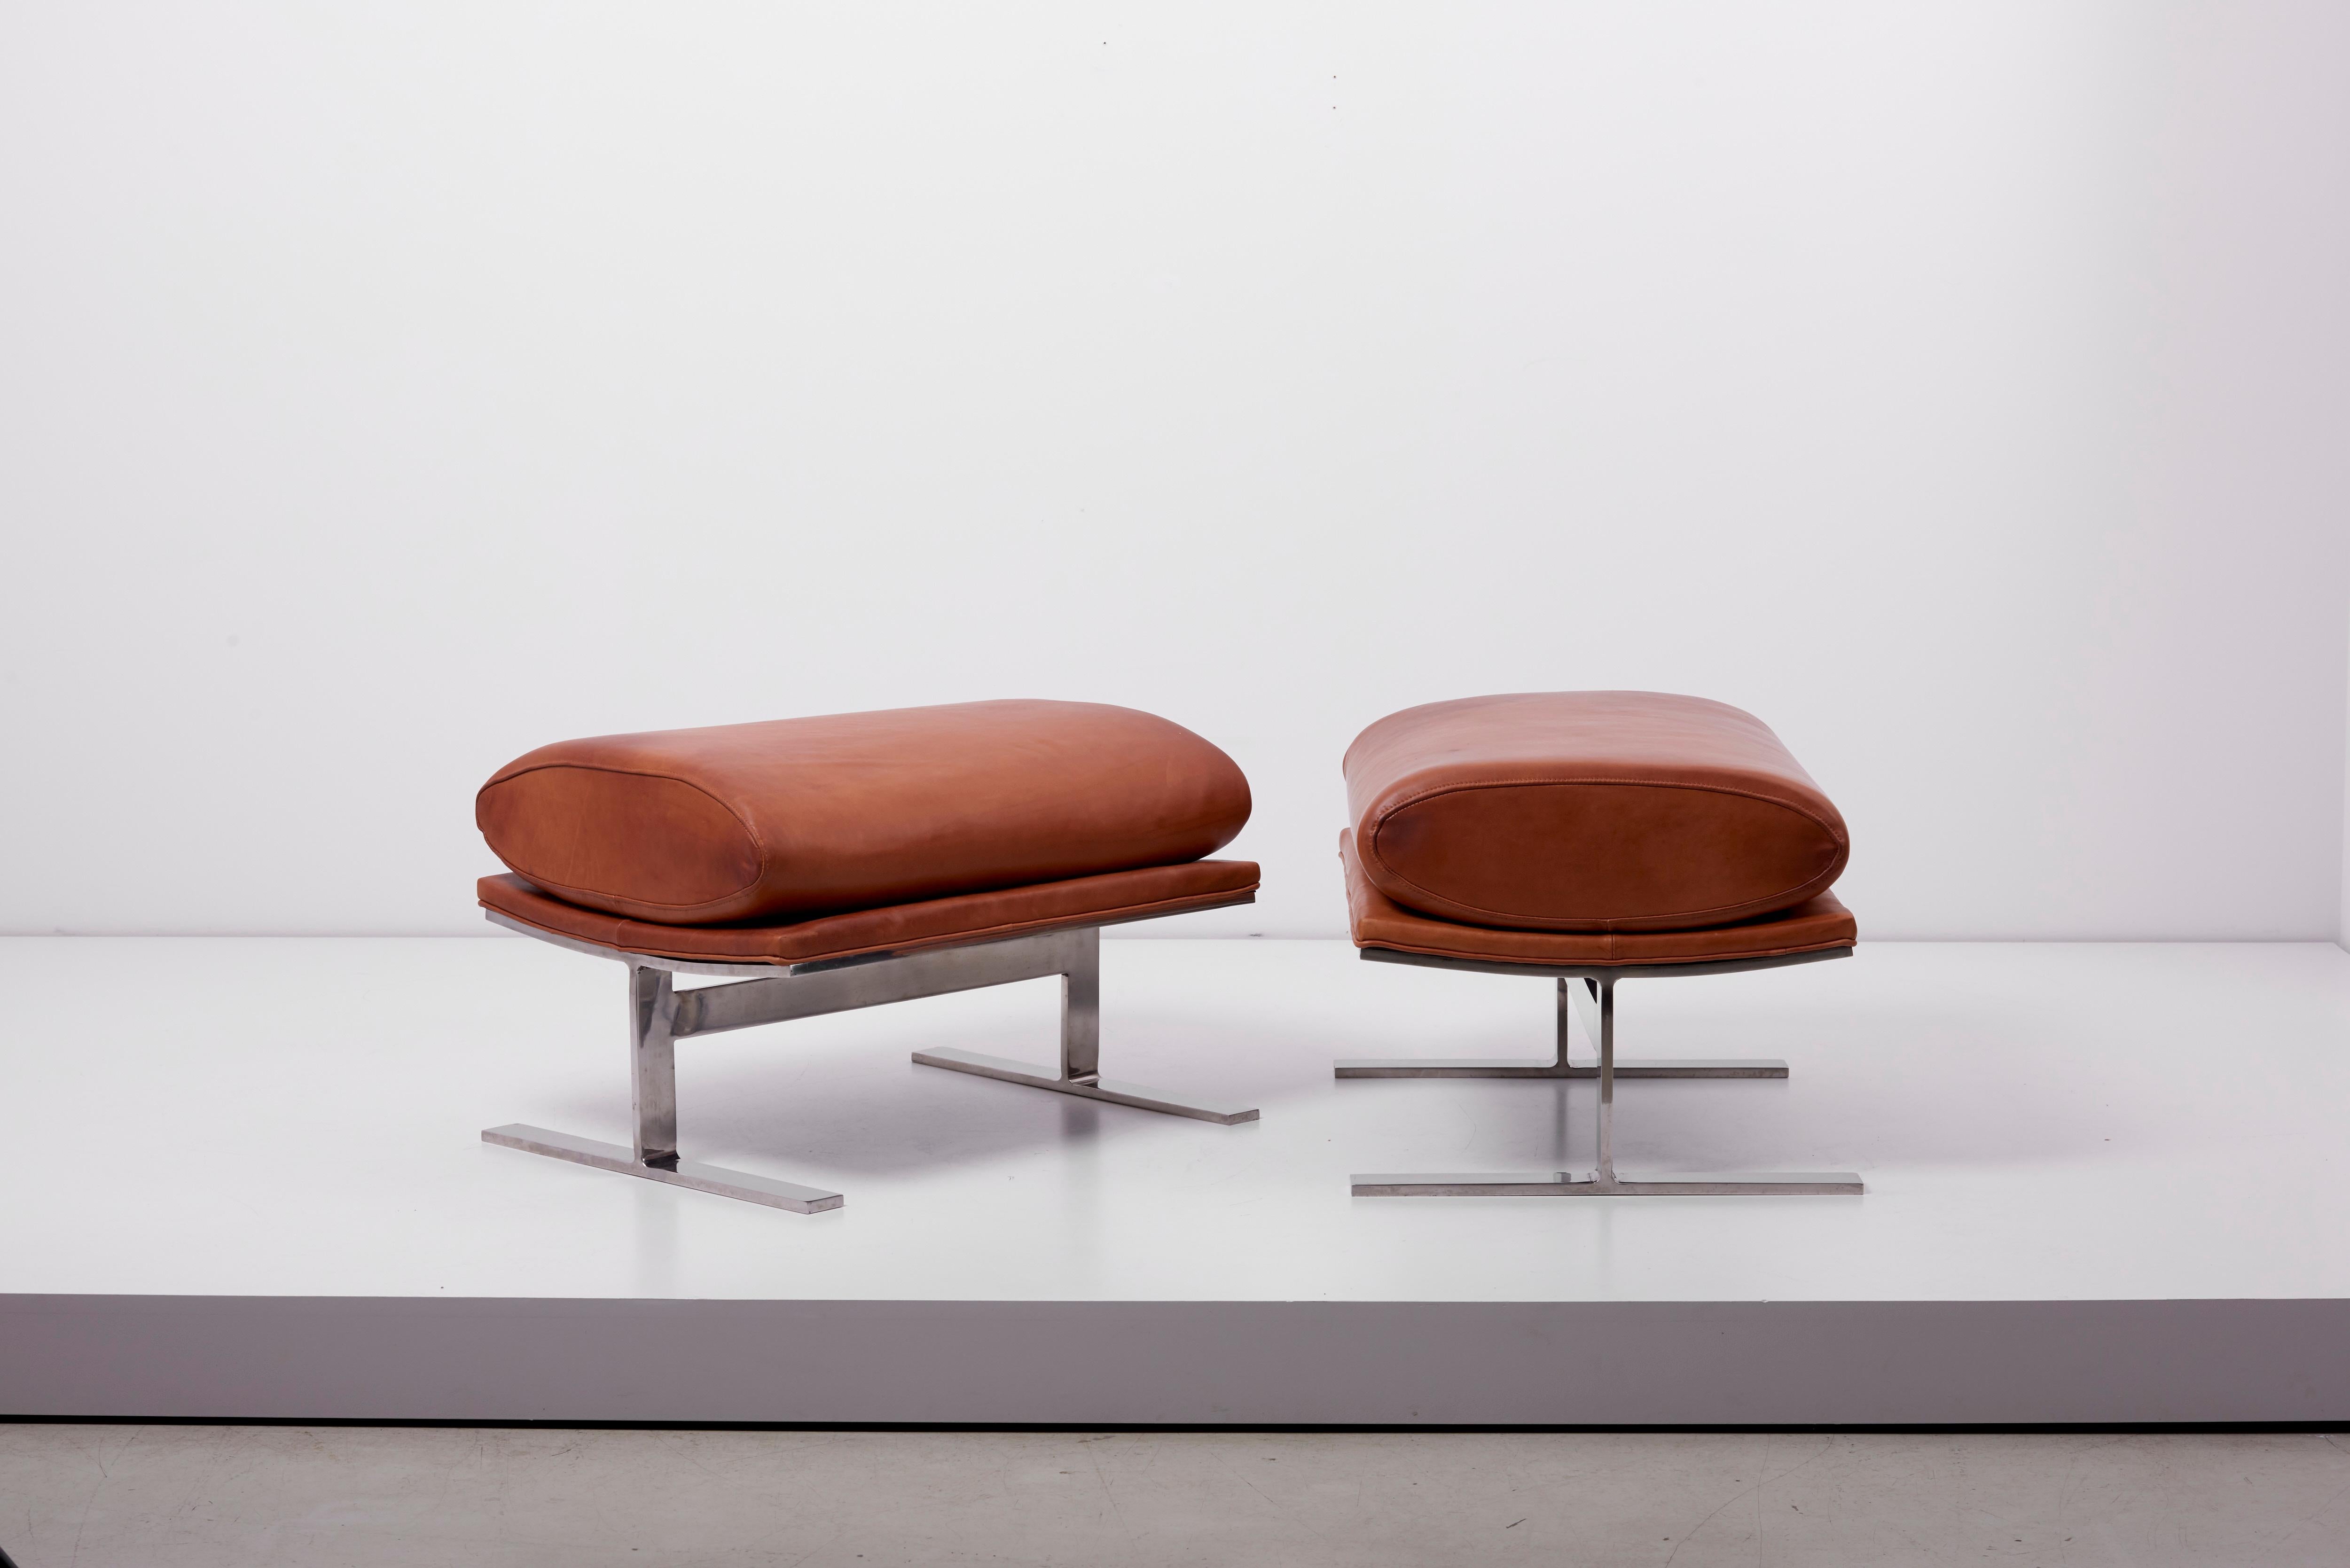 Polished Pair of Arc Stools 'can also be used as a Bench' by Kipp Stewart for Directional